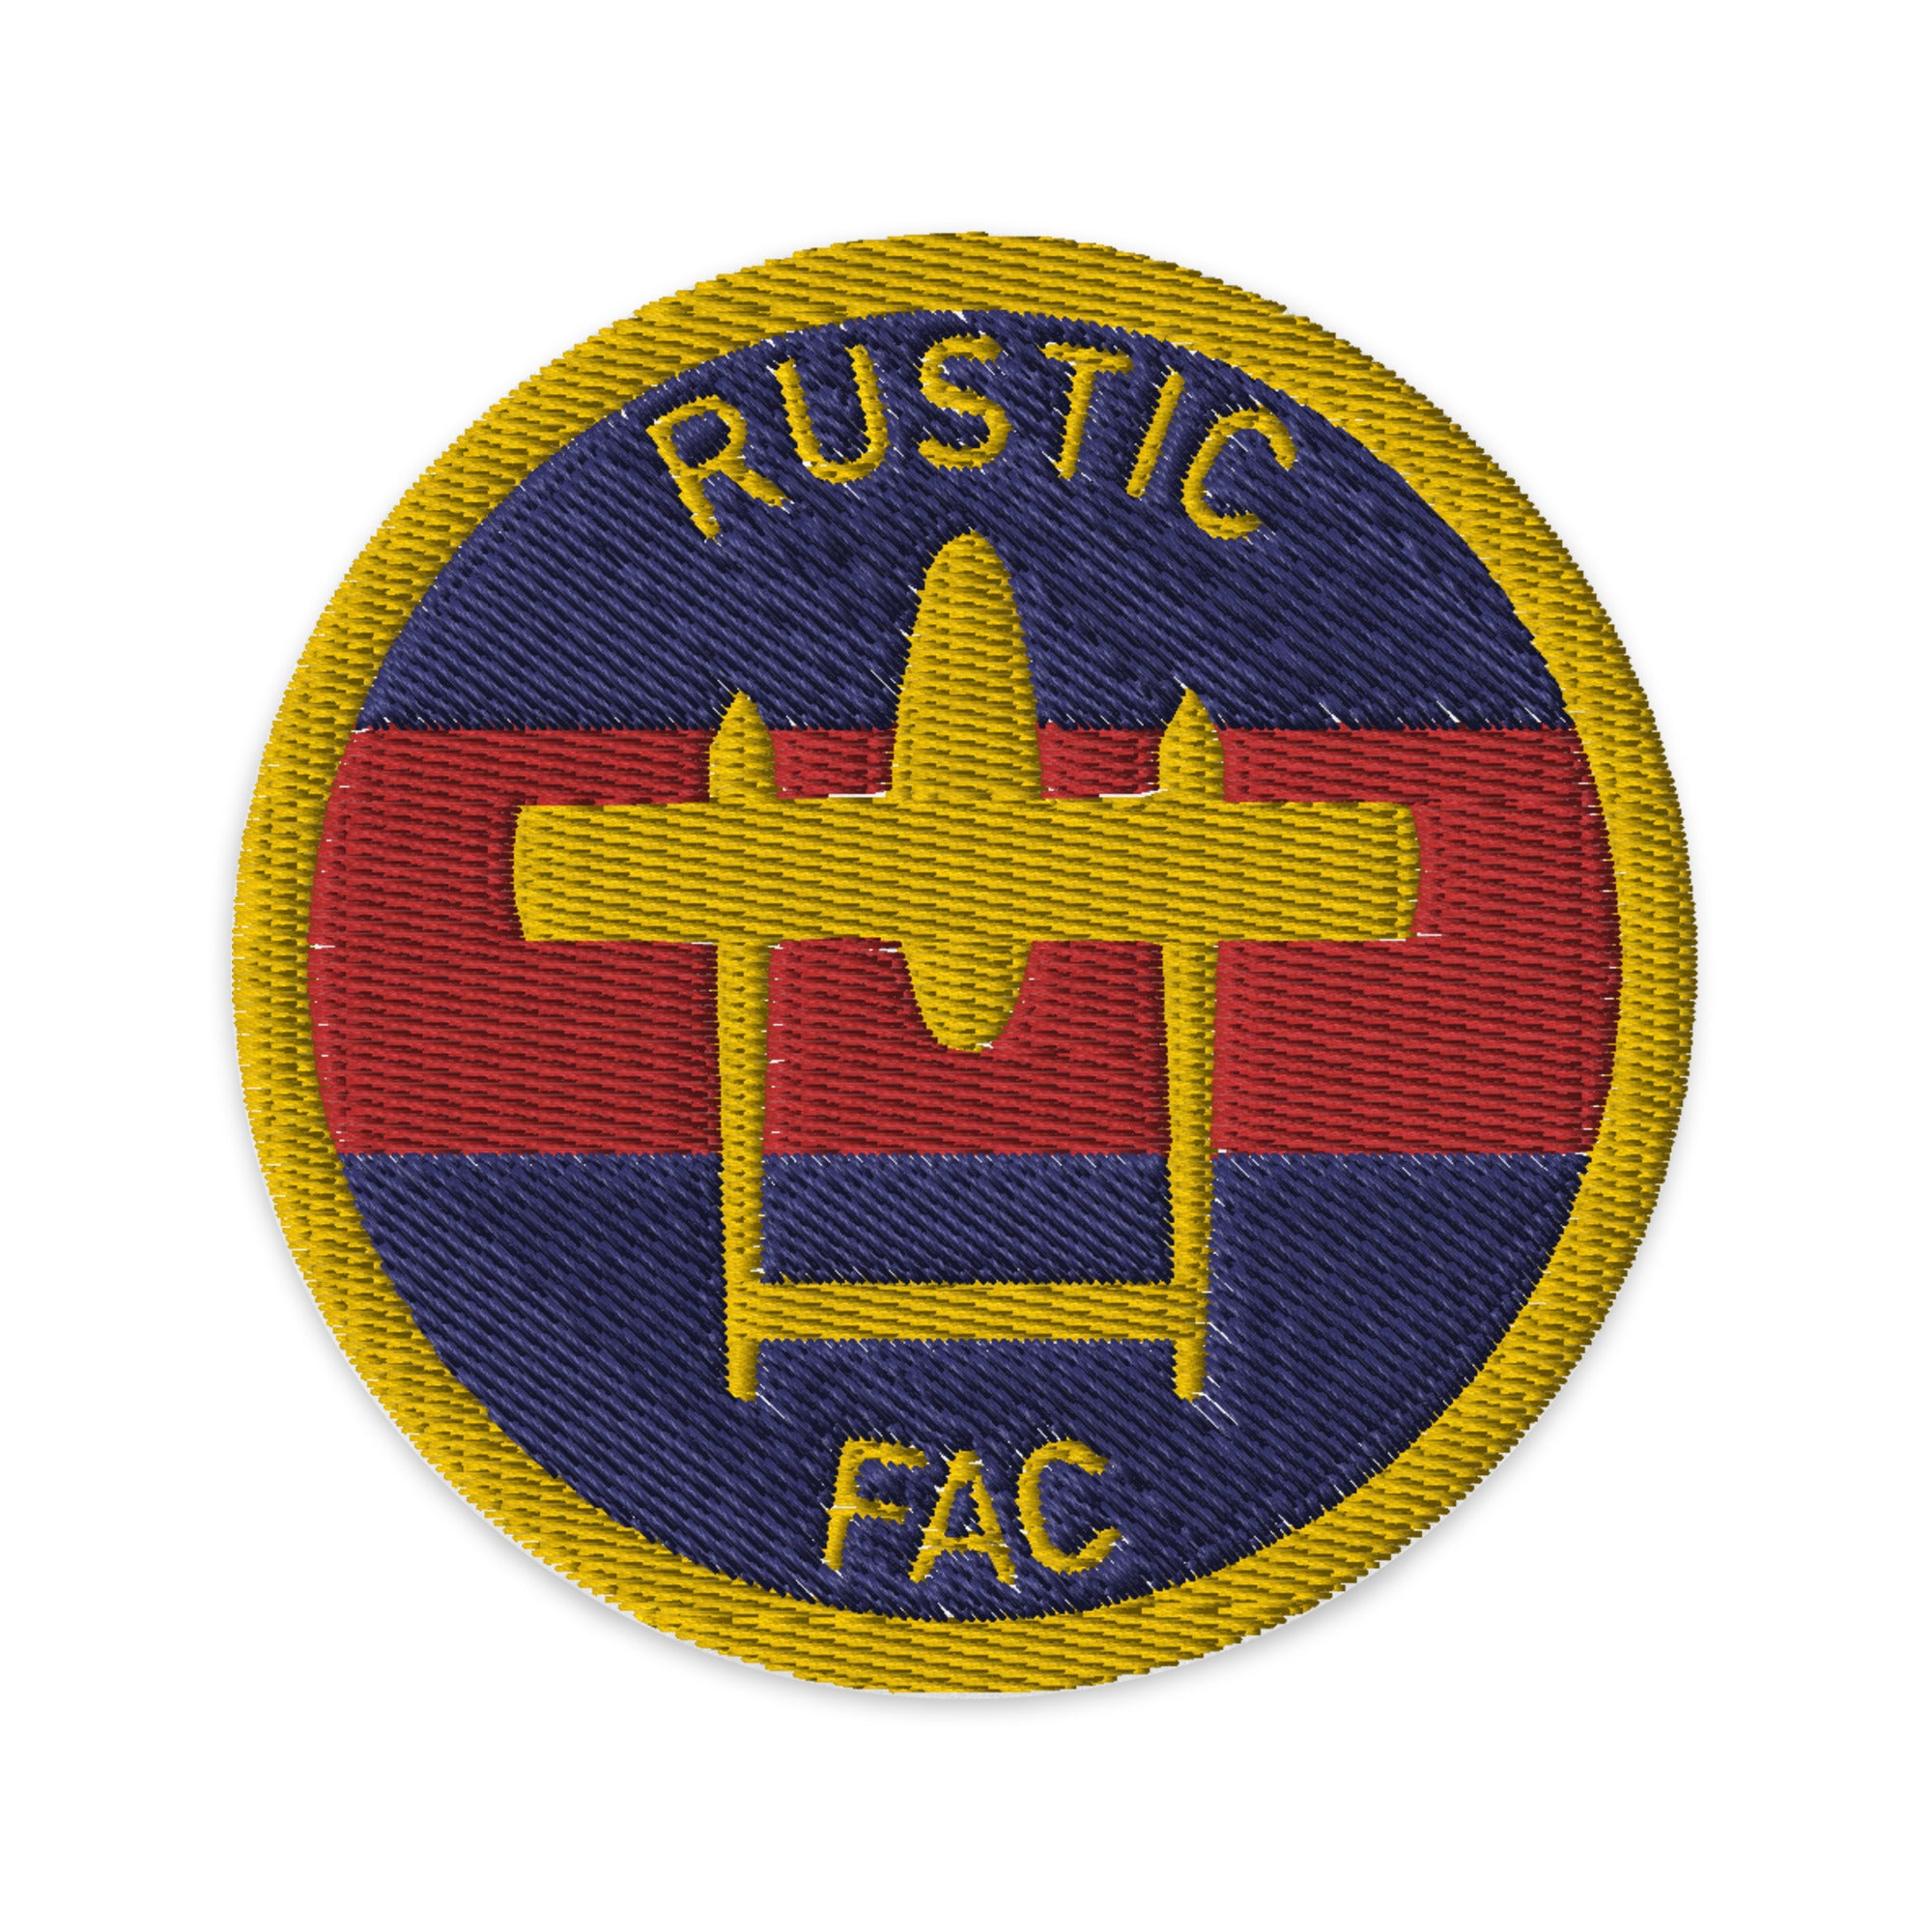 Rustic FAC 23rd TASS Embroidered patches - I Love a Hangar